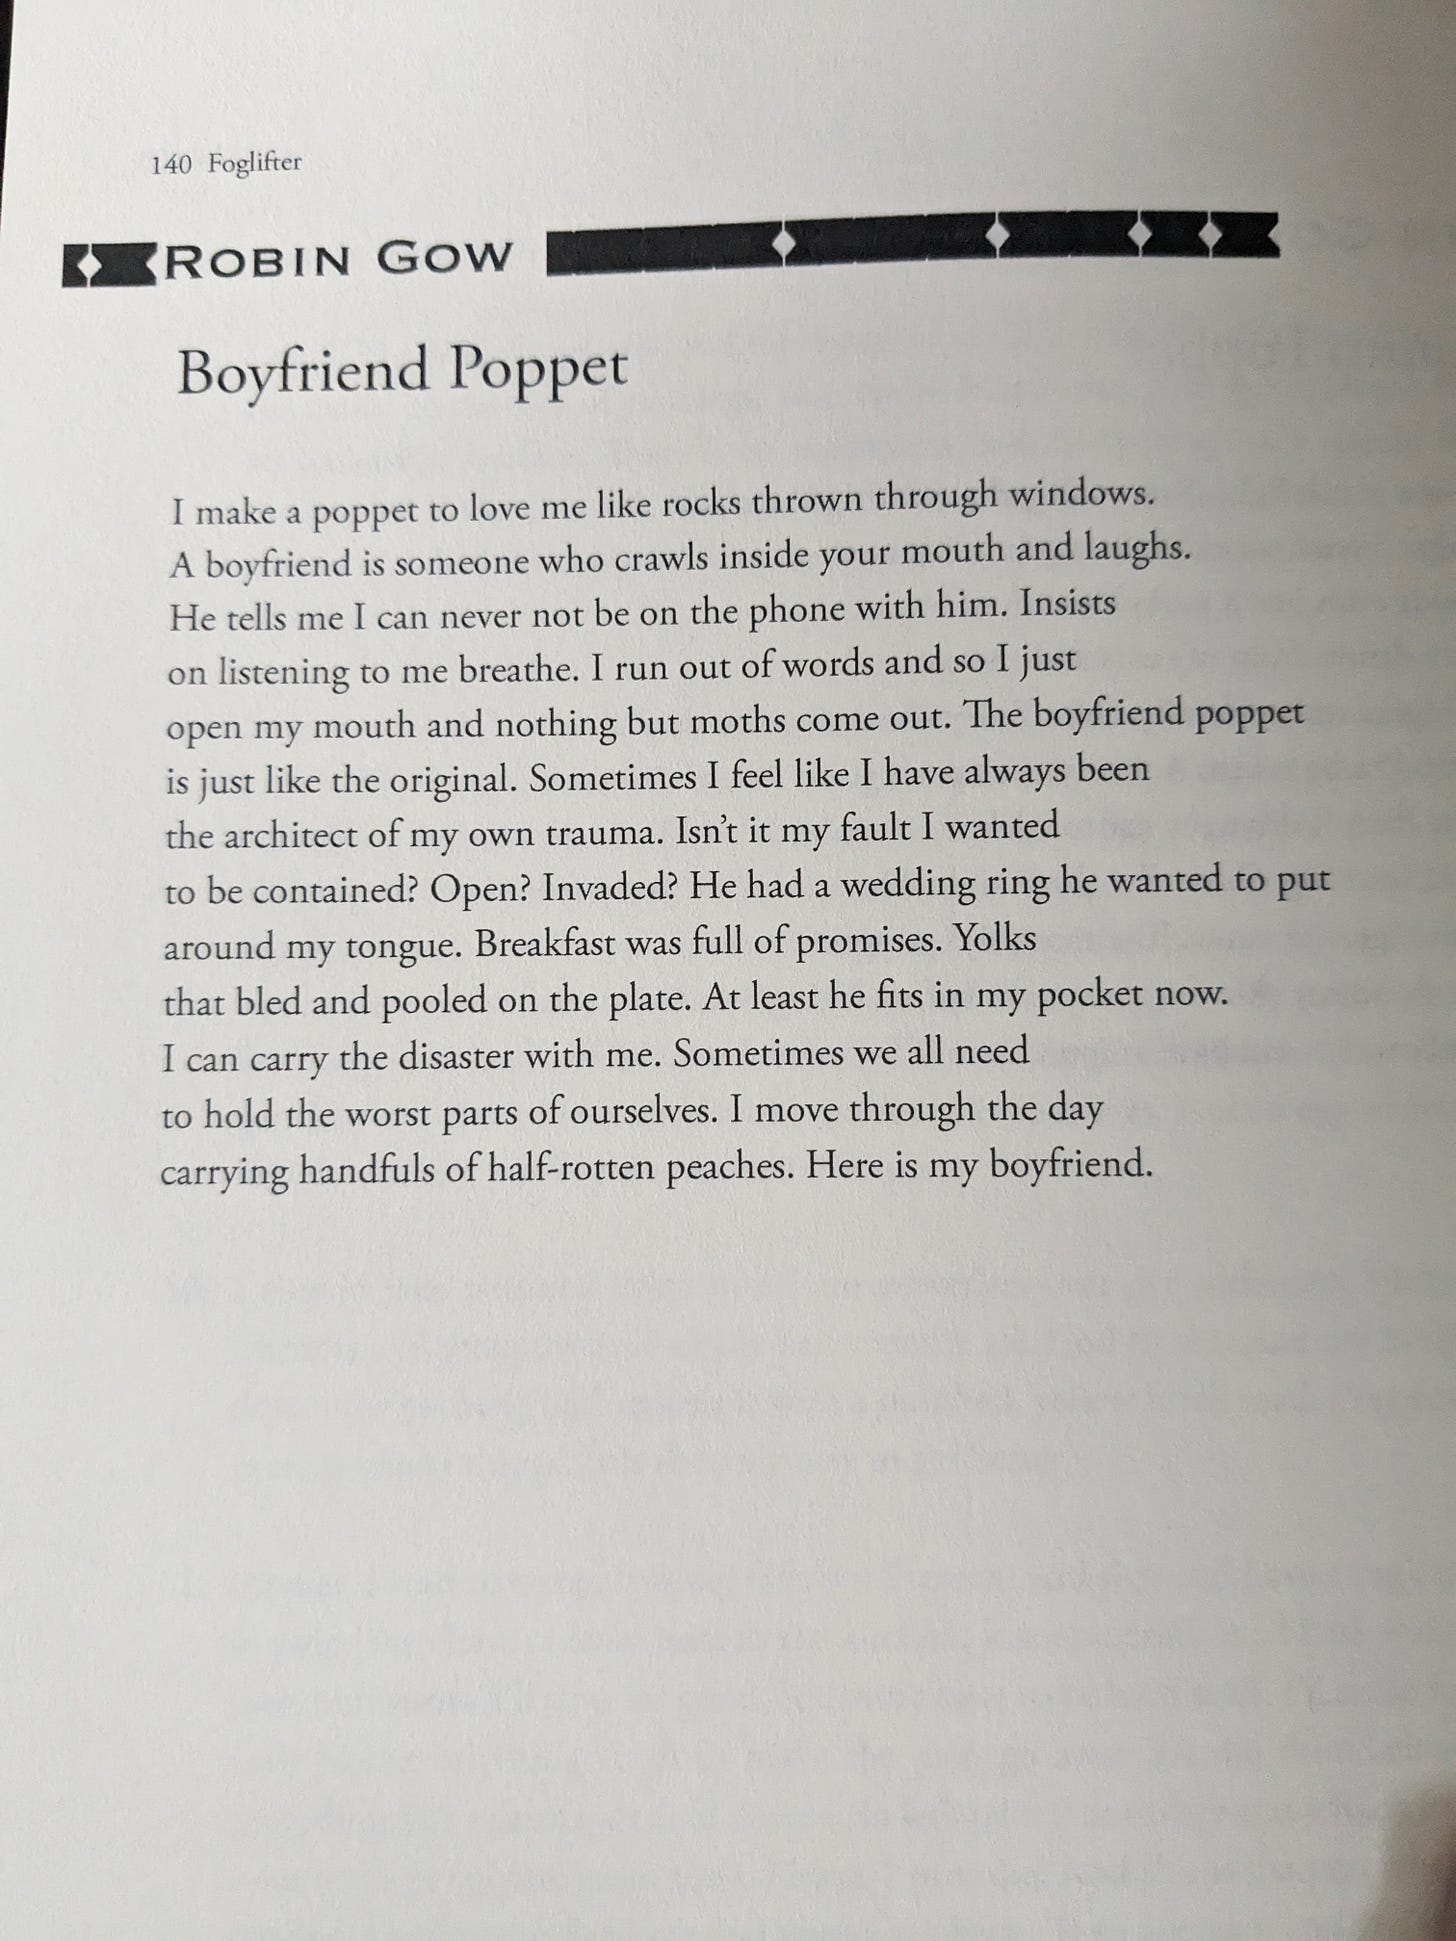 Photo of Robin Gow's poem. It is too long for alt text.